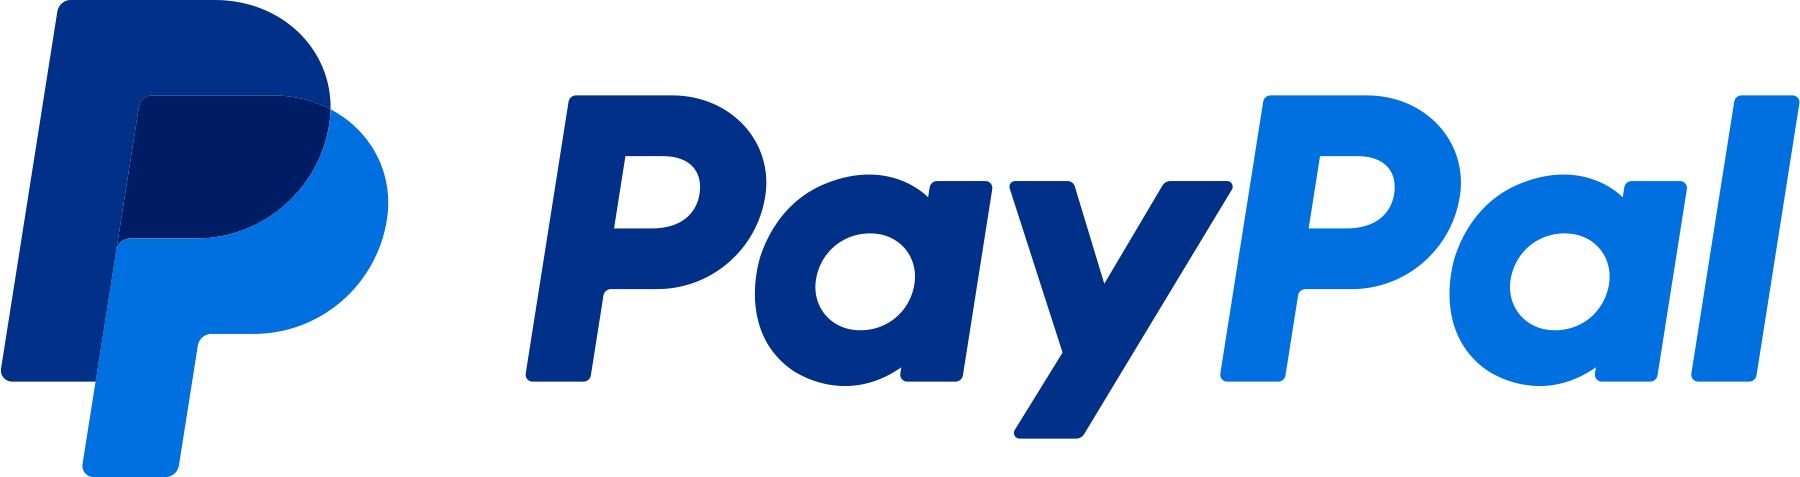 <a href="https://www.paypal.com/us/digital-wallet/manage-money/crypto/pyusd/?utm_source=beincrypto&utm_medium=listicle_1&utm_campaign=PYUSD_openletter">www.paypal.com</a>